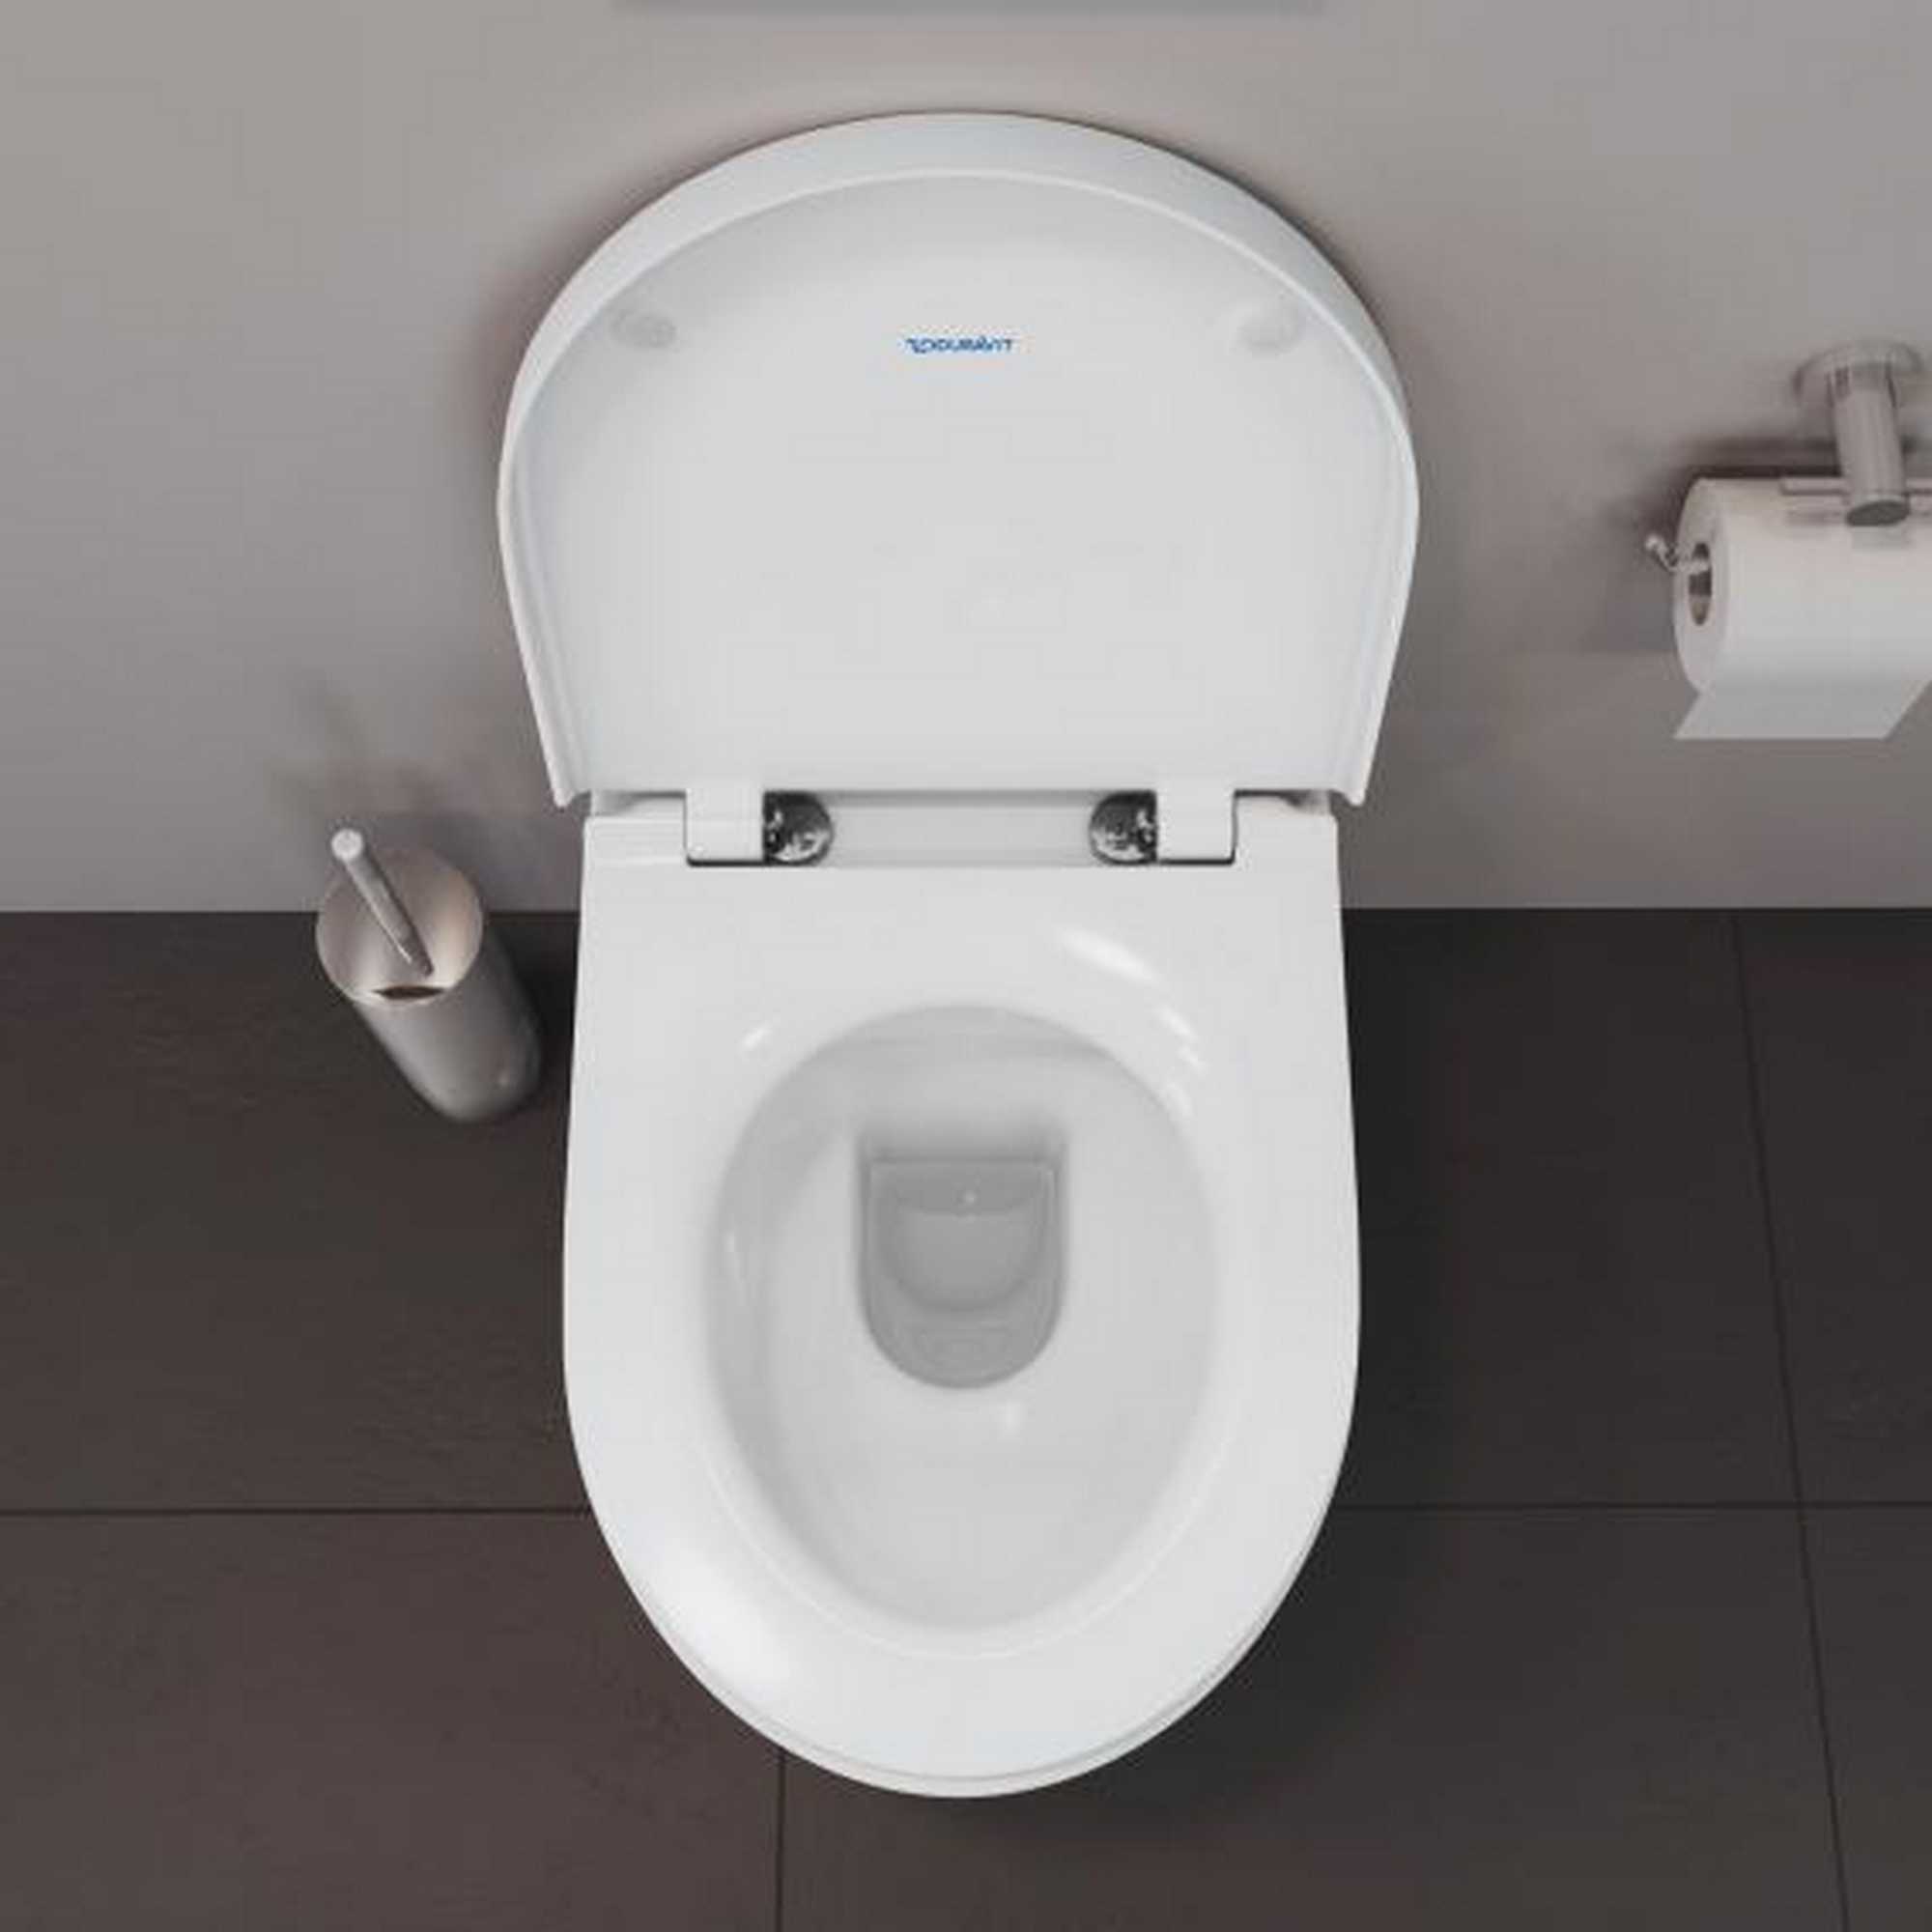 Wand-WC 'DuraStyle Basic' inklusive WC-Sitz 40 x 44 x 55 cm + product picture